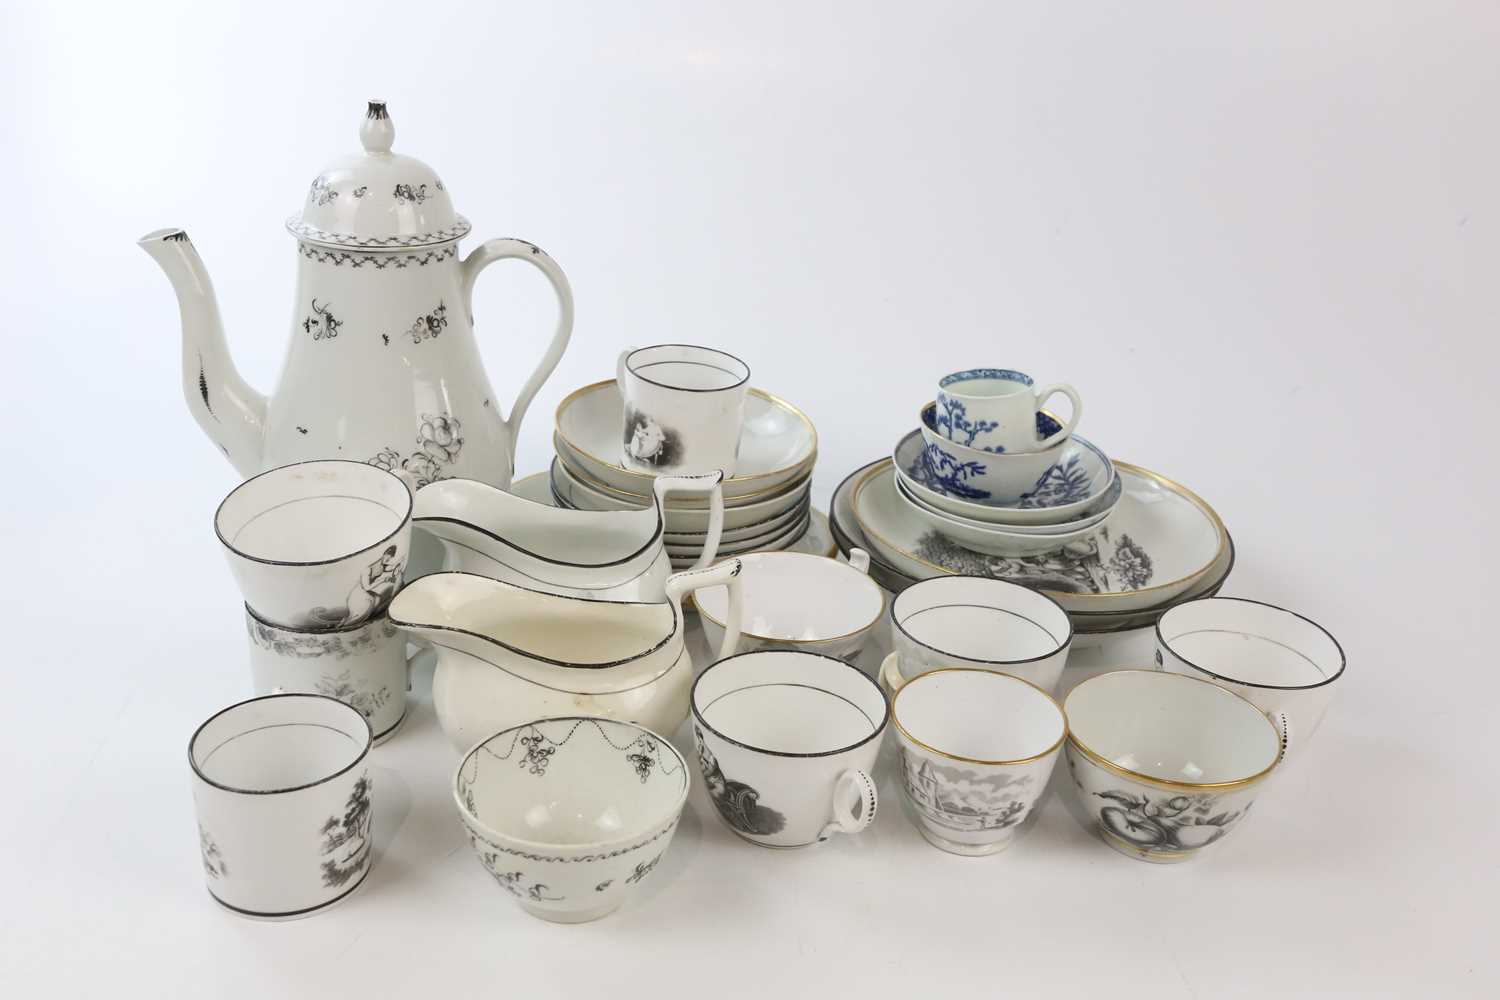 NEW HALL; a collection of twenty-five tea and coffee wares, decorated with monochrome patterns and